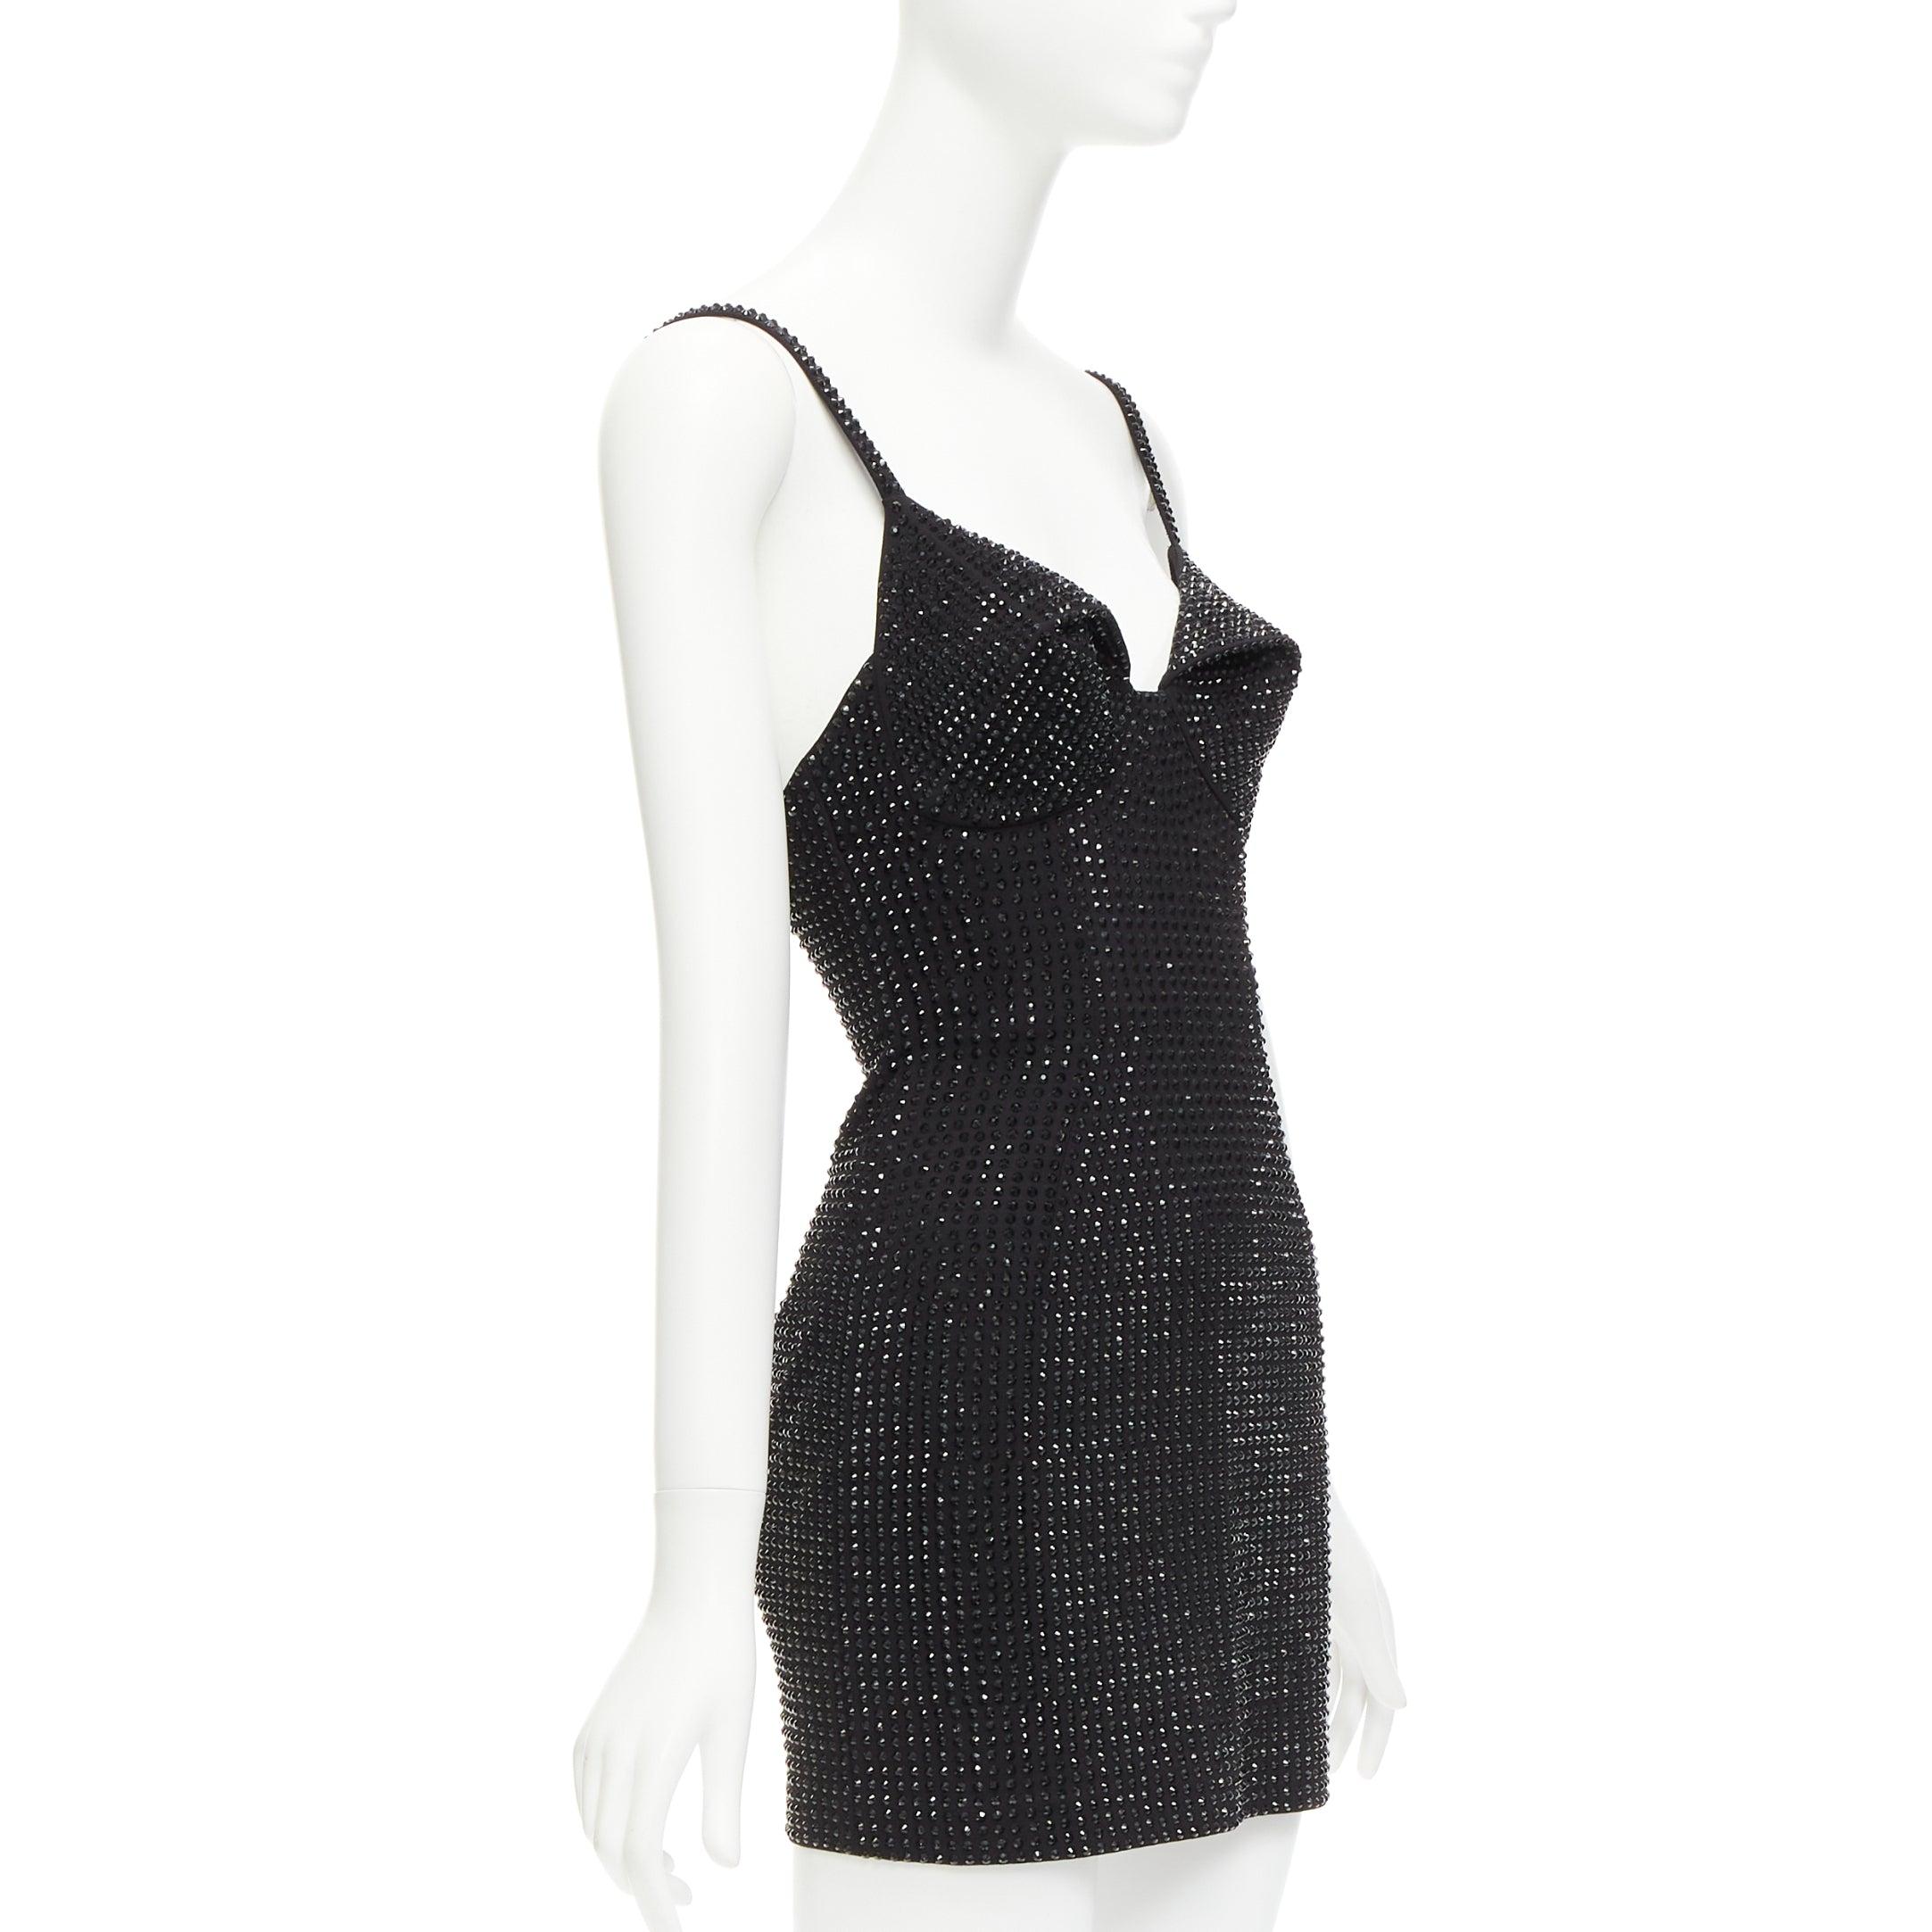 AREA black crystal embellished conical bra spaghetti bodycon mini dress US2 S
Reference: TGAS/D01015
Brand: Area
Model: Embellished Mini Dress
Material: Rayon, Blend
Color: Black
Pattern: Solid
Closure: Zip
Lining: Black Fabric
Extra Details: Back